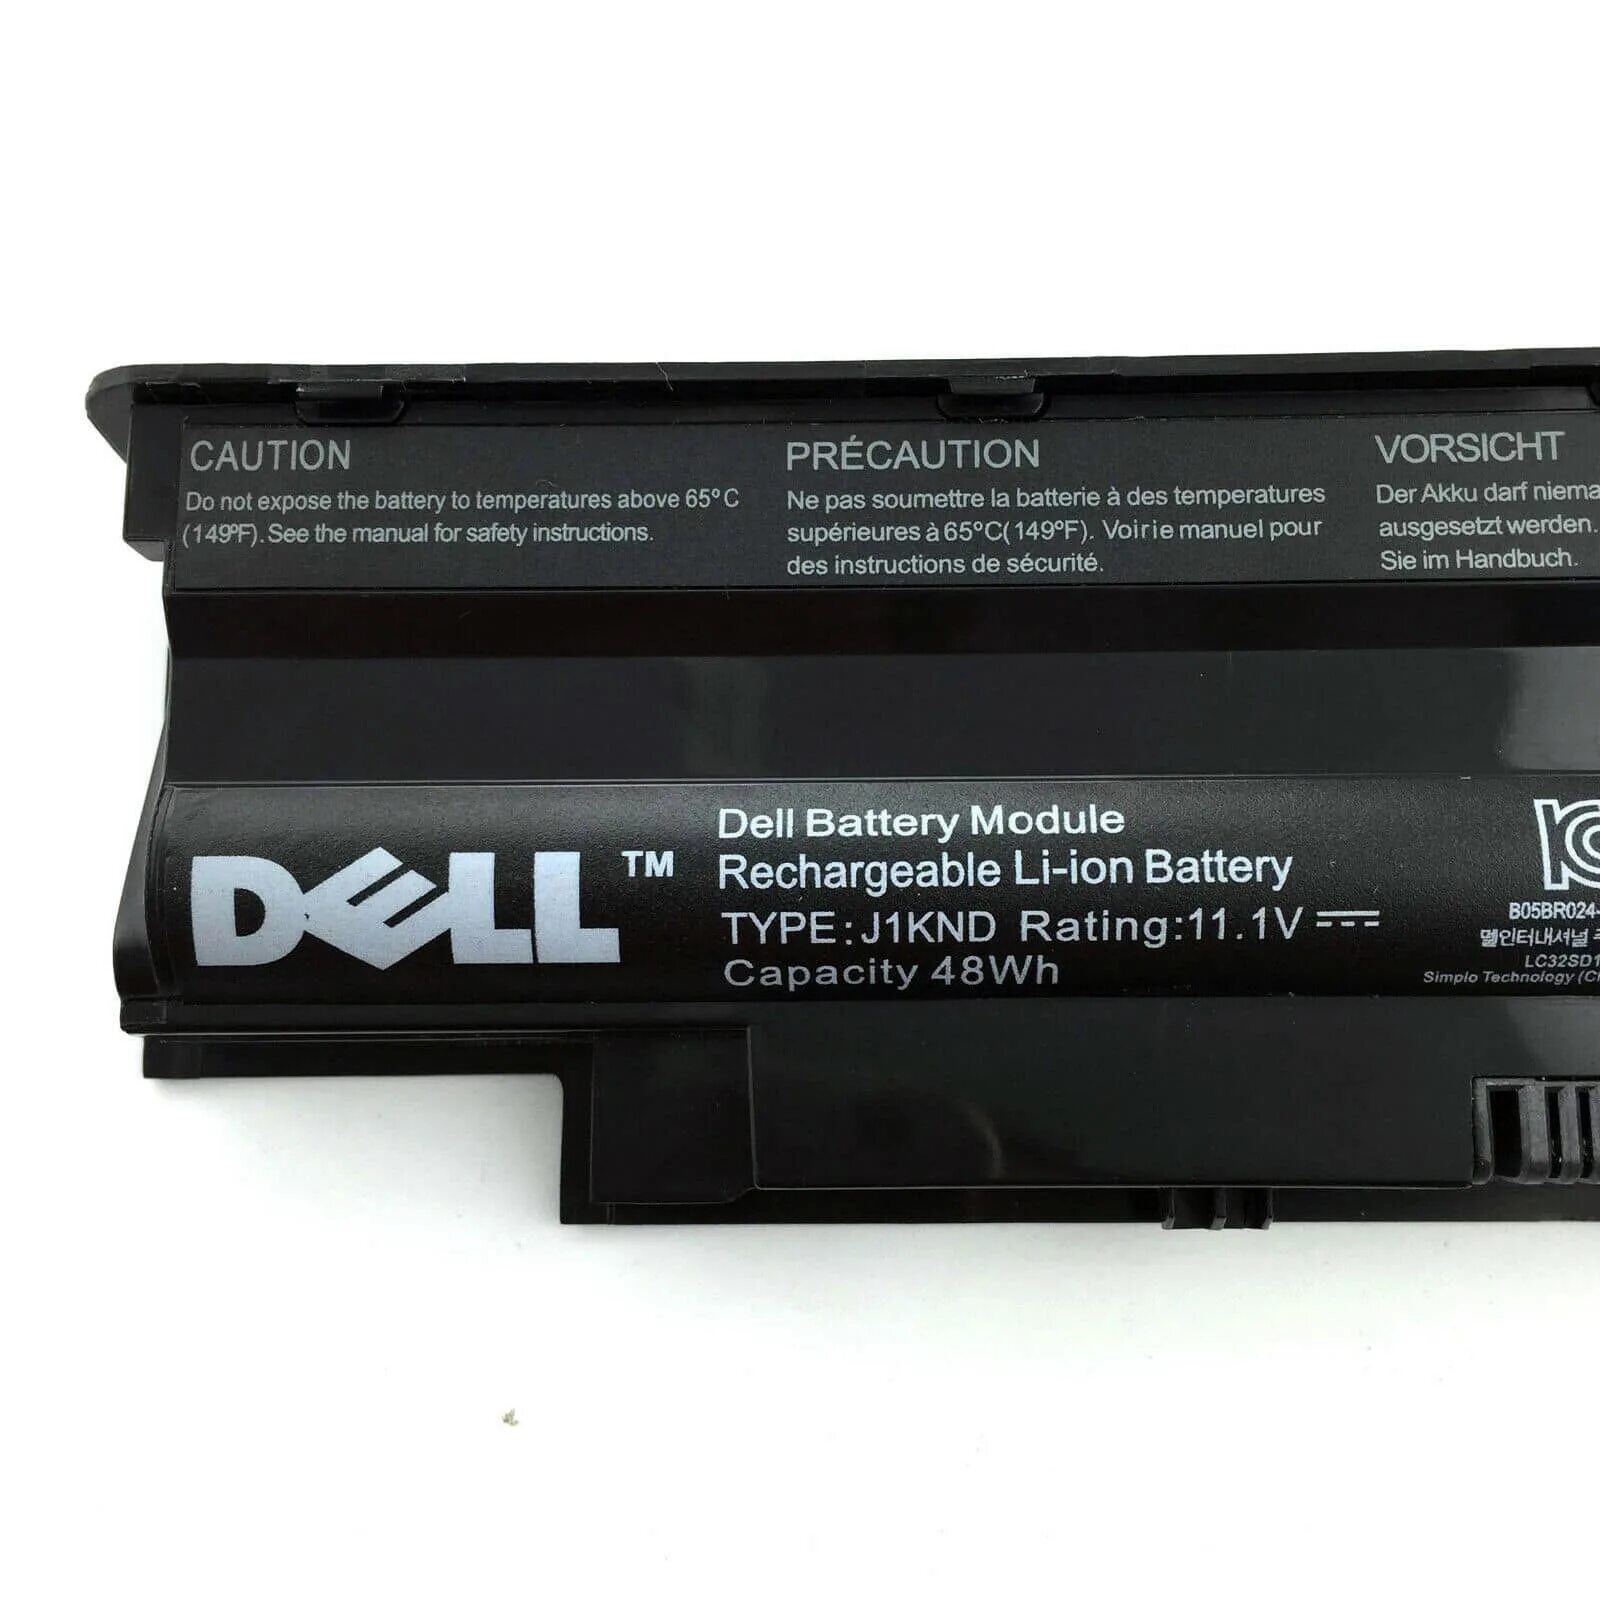 Dell j1knd Battery. Dell Battery Module Rechargeable li-ion Battery Type j1knd rating 11.1v capacity 48wh. АКБ dell j1knd rating 11.1v. Dell Battery Module Rechargeable li-ion Battery Type j1knd rating 11.1v capacity 48wh распиновка.